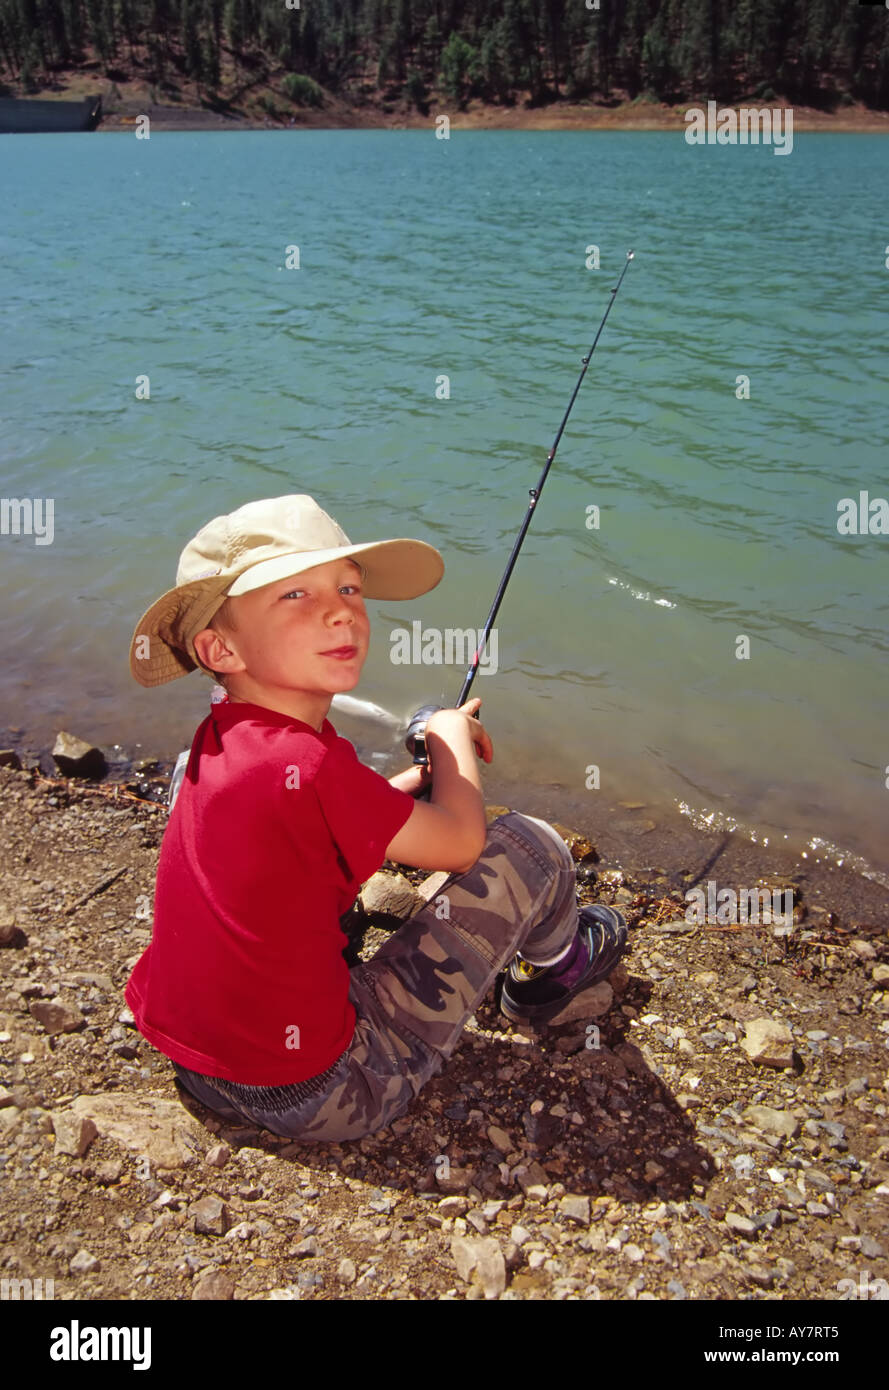 MR 504 Young angler Forrest Sweat lures in a lunker trout, during Fishing Day at  Grindstone Lake, in Ruidoso New Mexico. Stock Photo